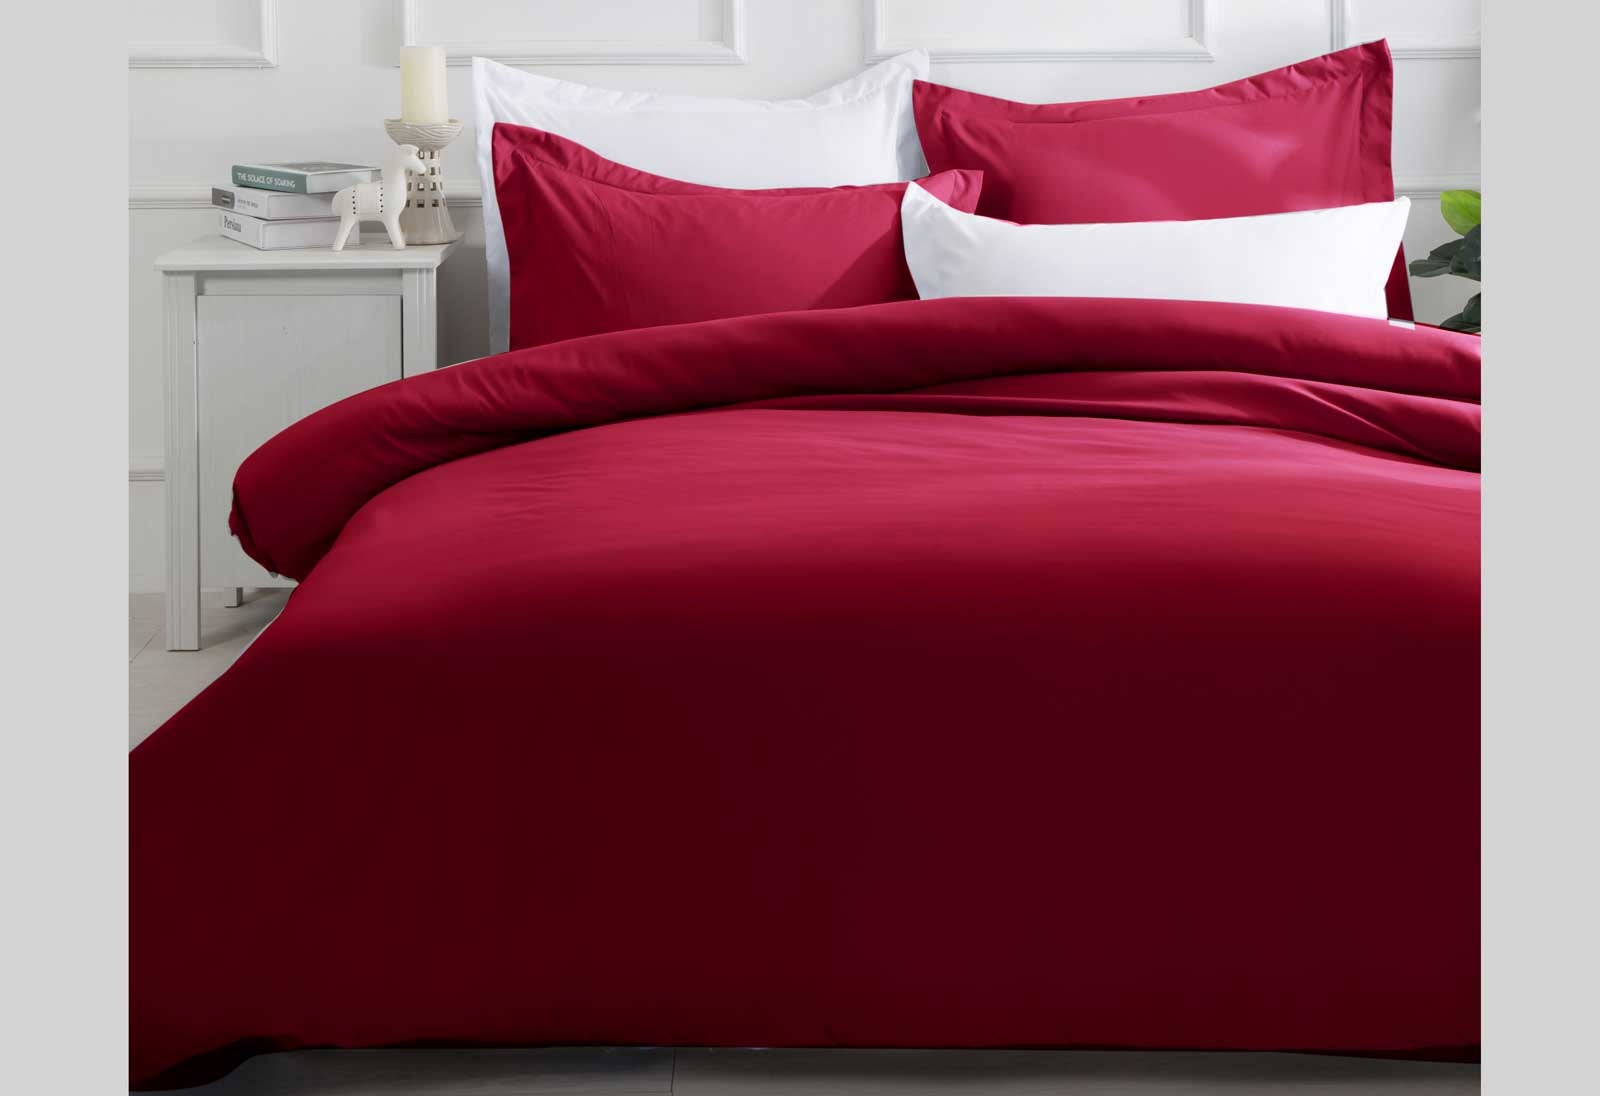 Solid Burgundy red Quilt Cover Duvet Cover set ( Queen / King / Super King Size)